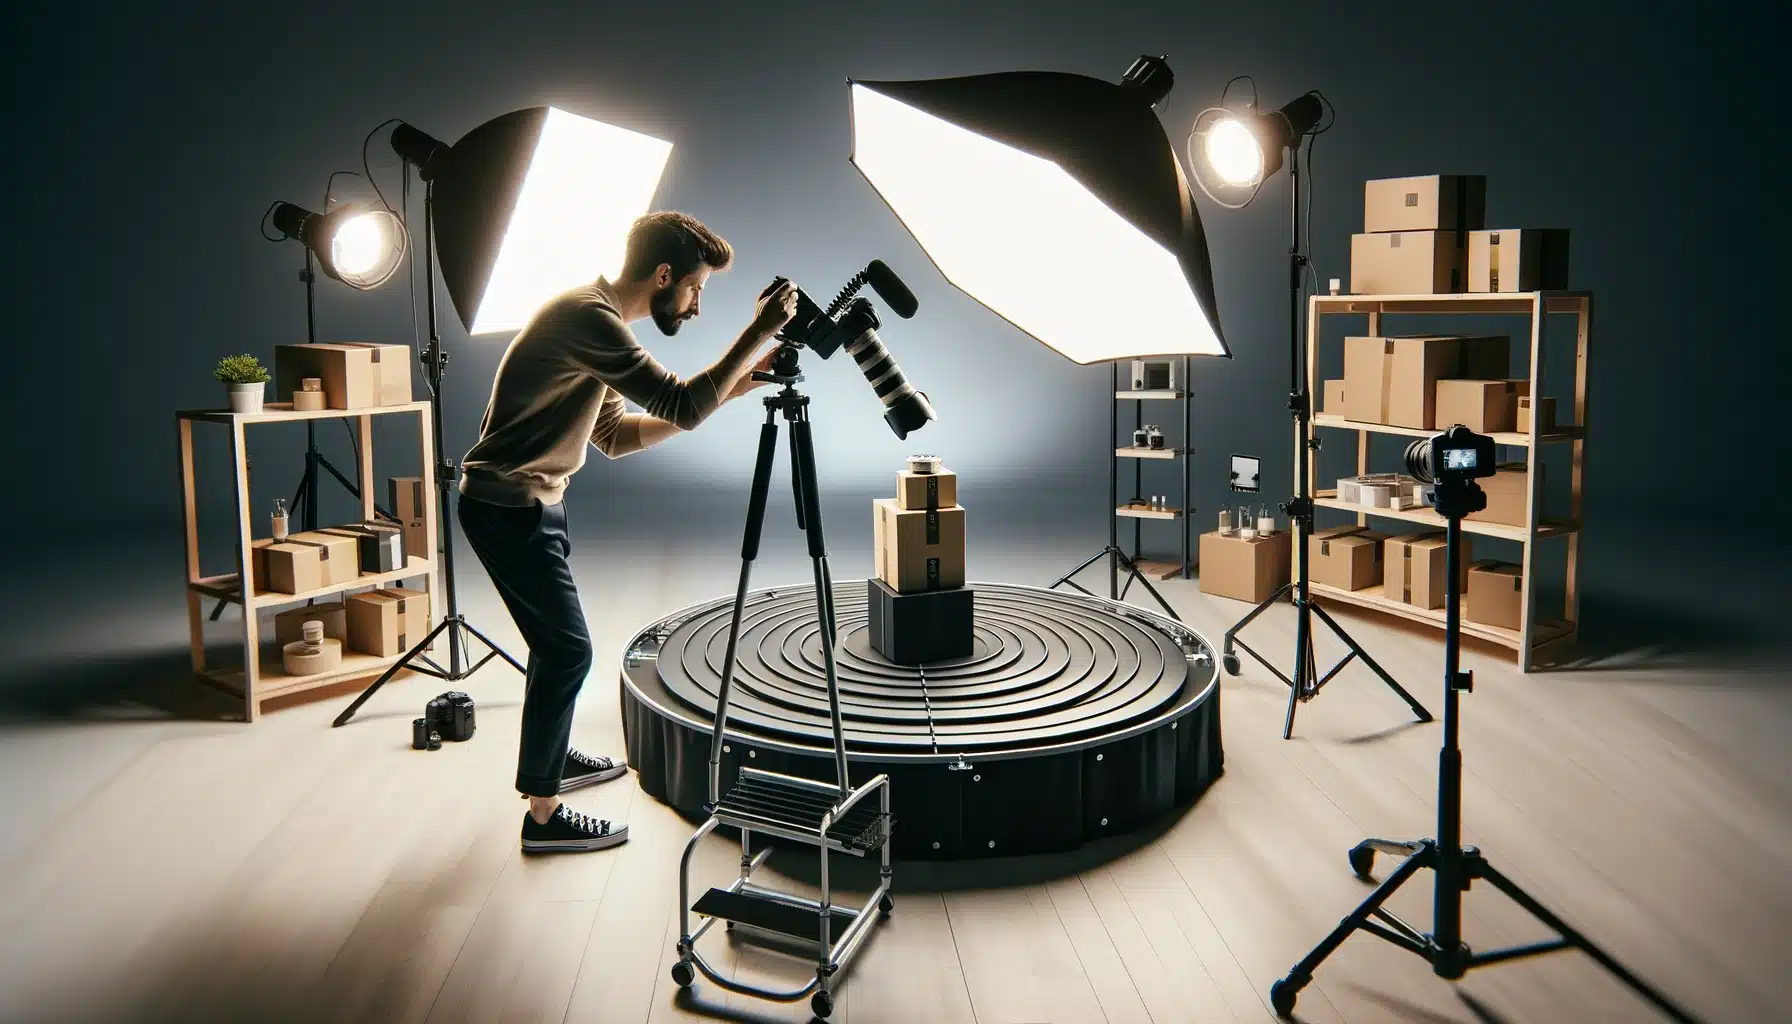 360 Product Photography setup and tips. Adjusting the basic settings to capture awesome shots.